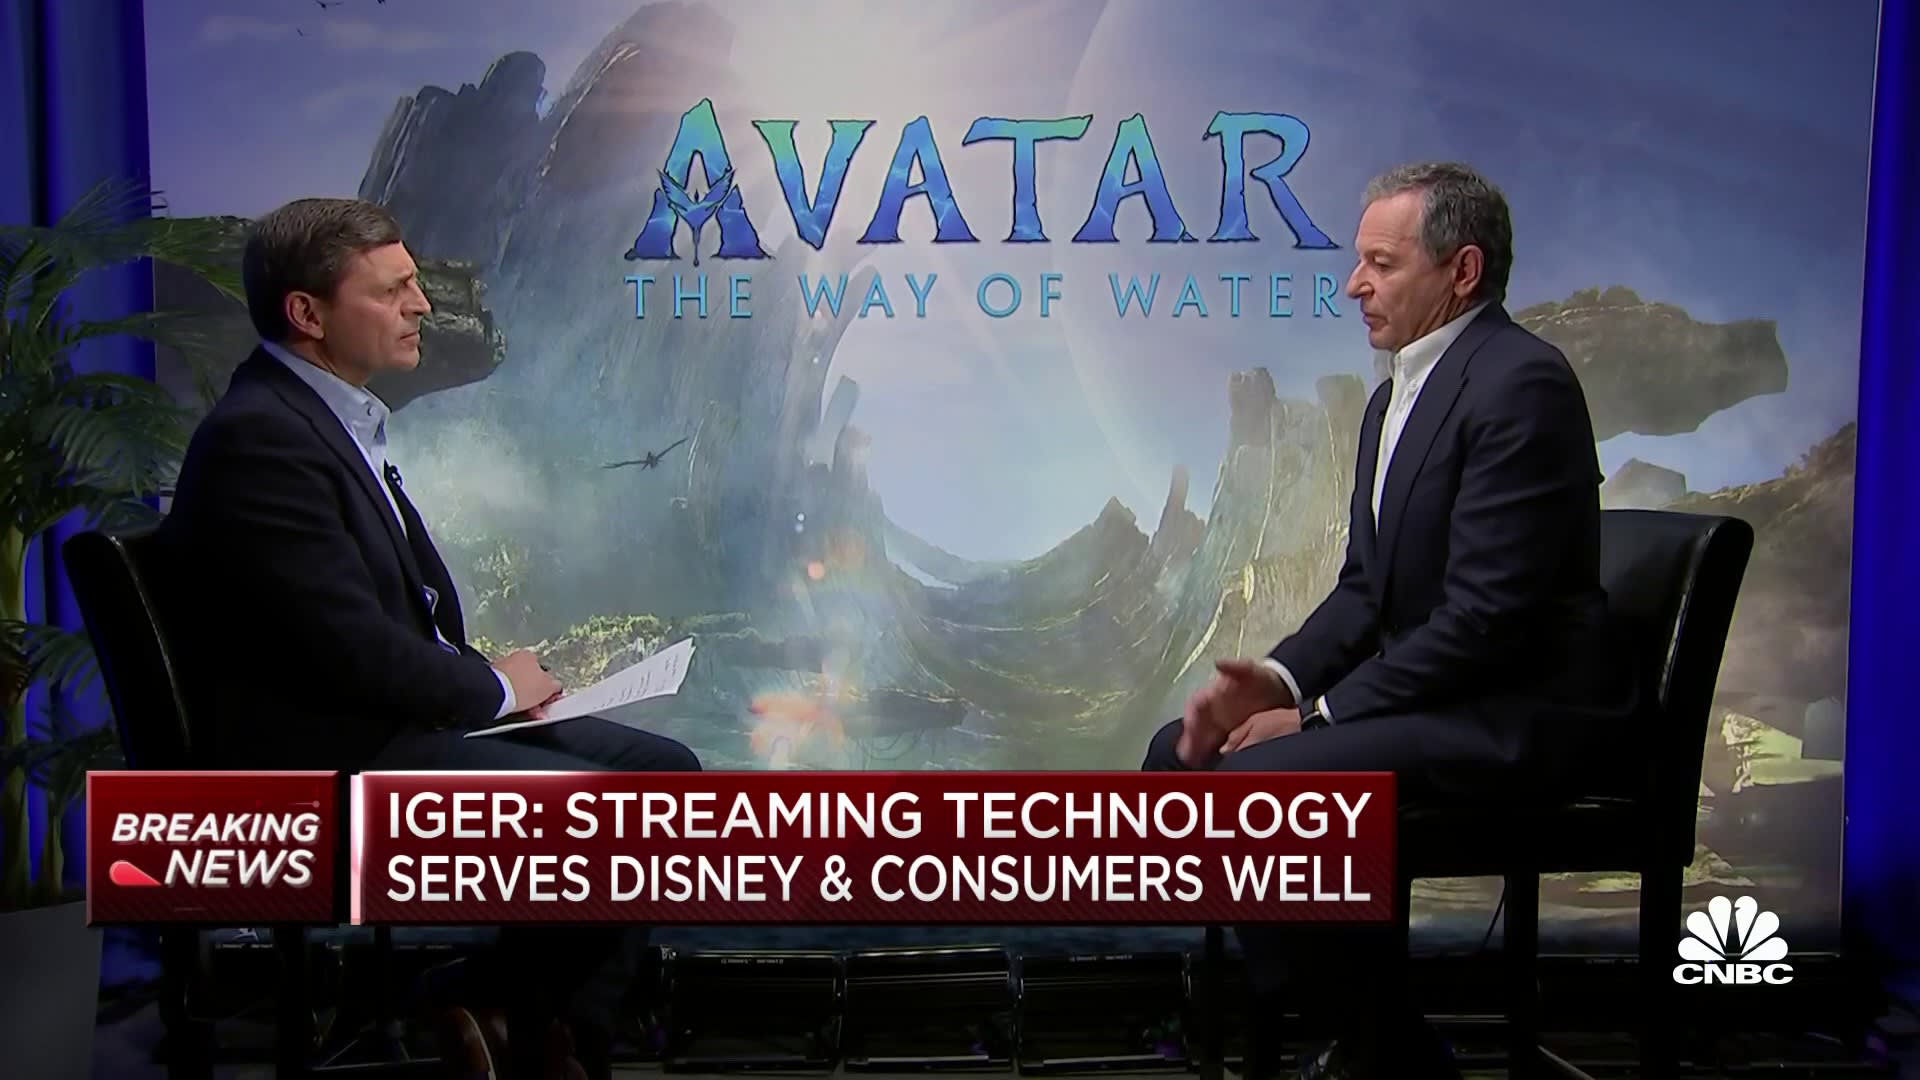 Bob Iger: We have pricing leverage when it comes to Disney+